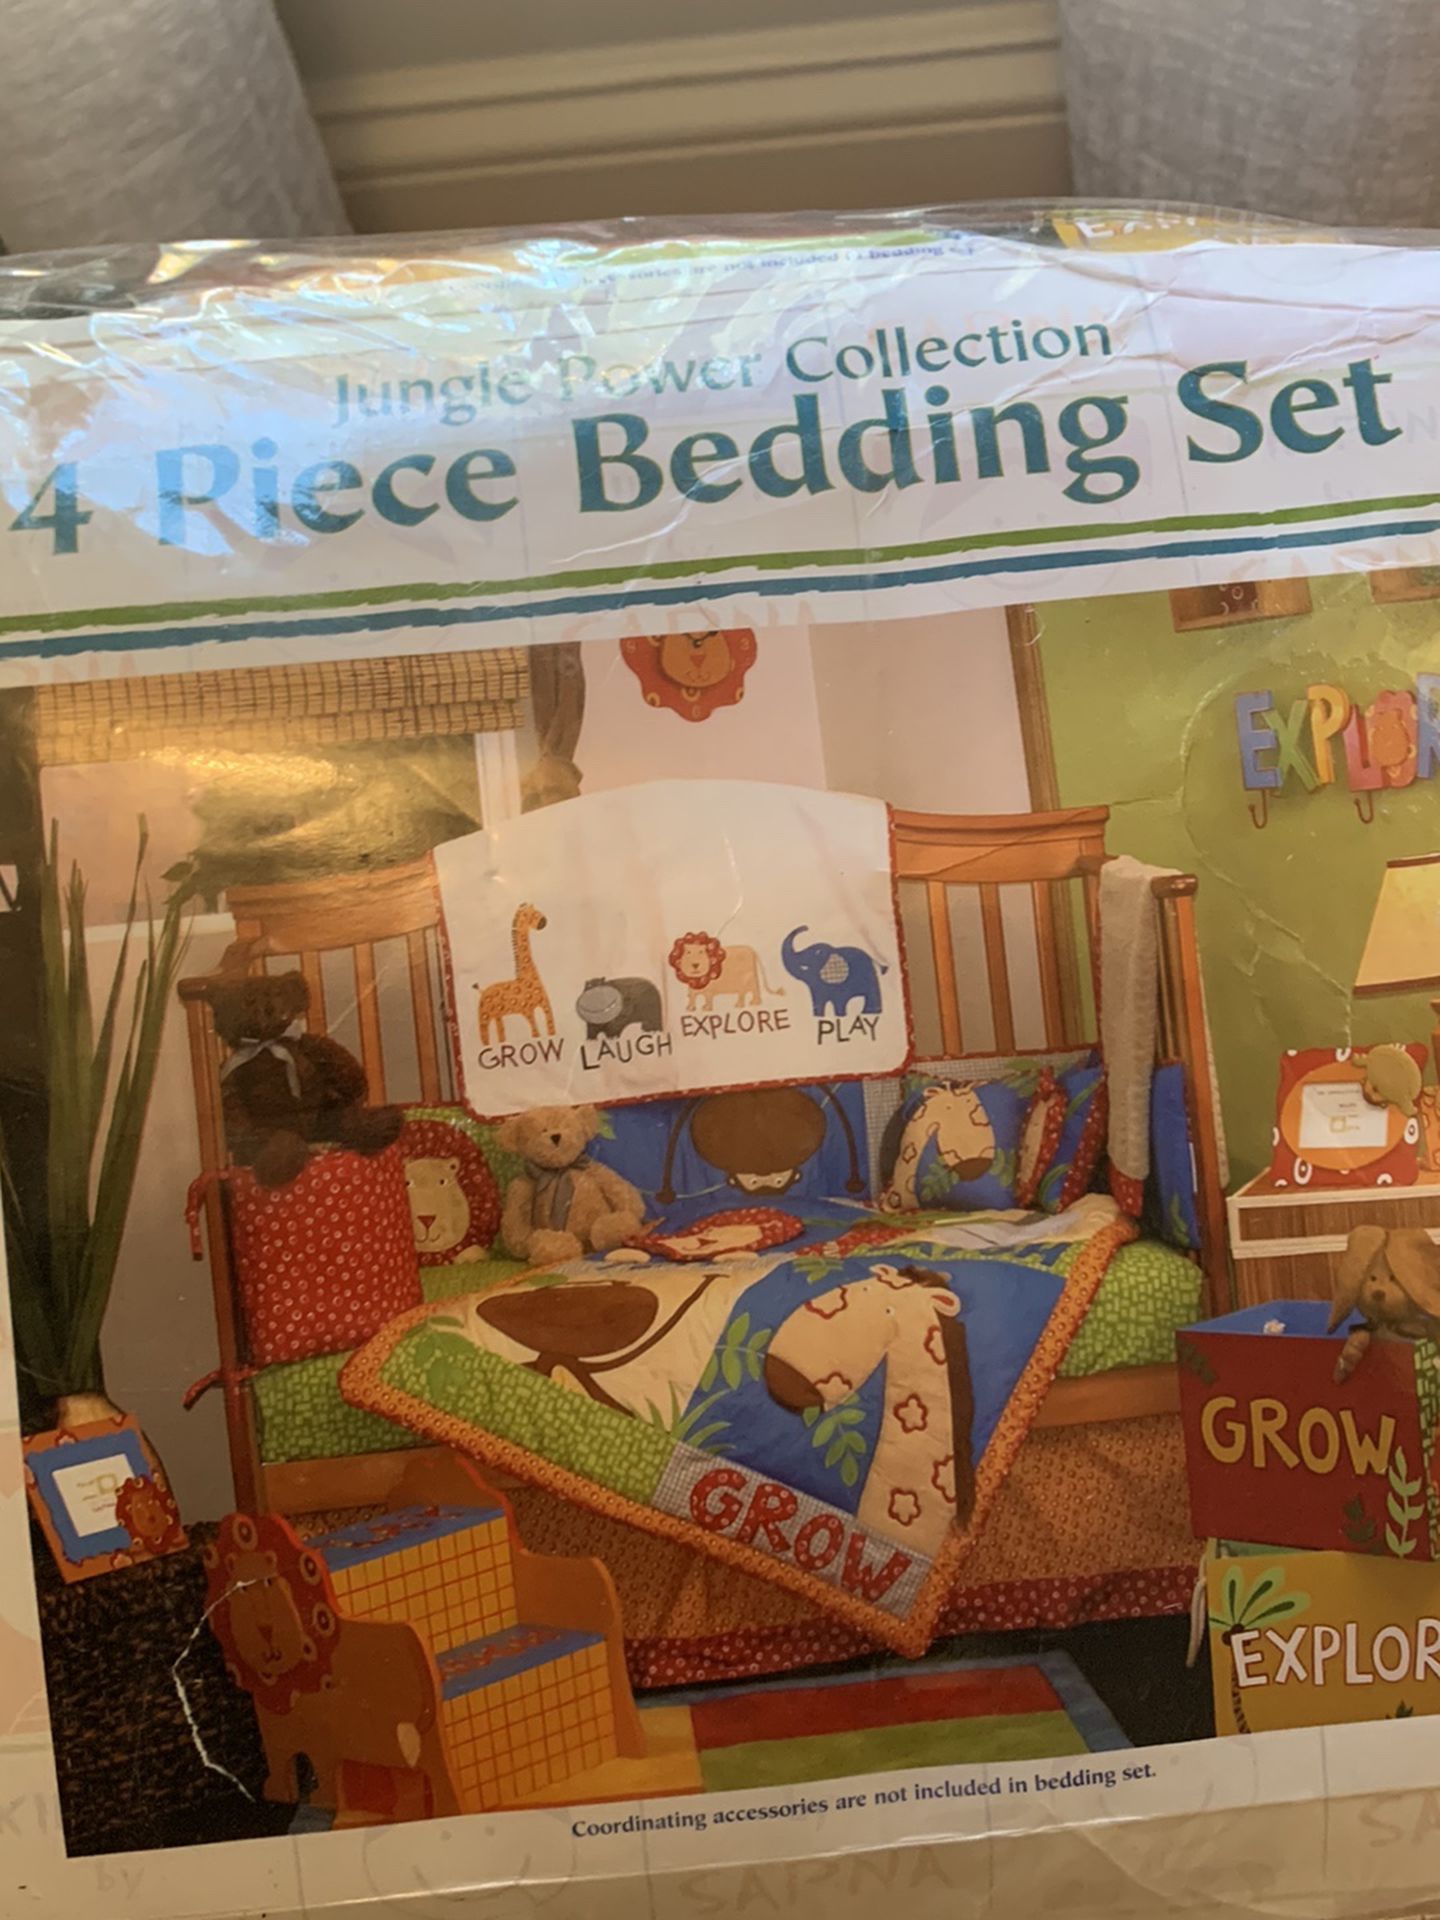 4 Bed Setting $15